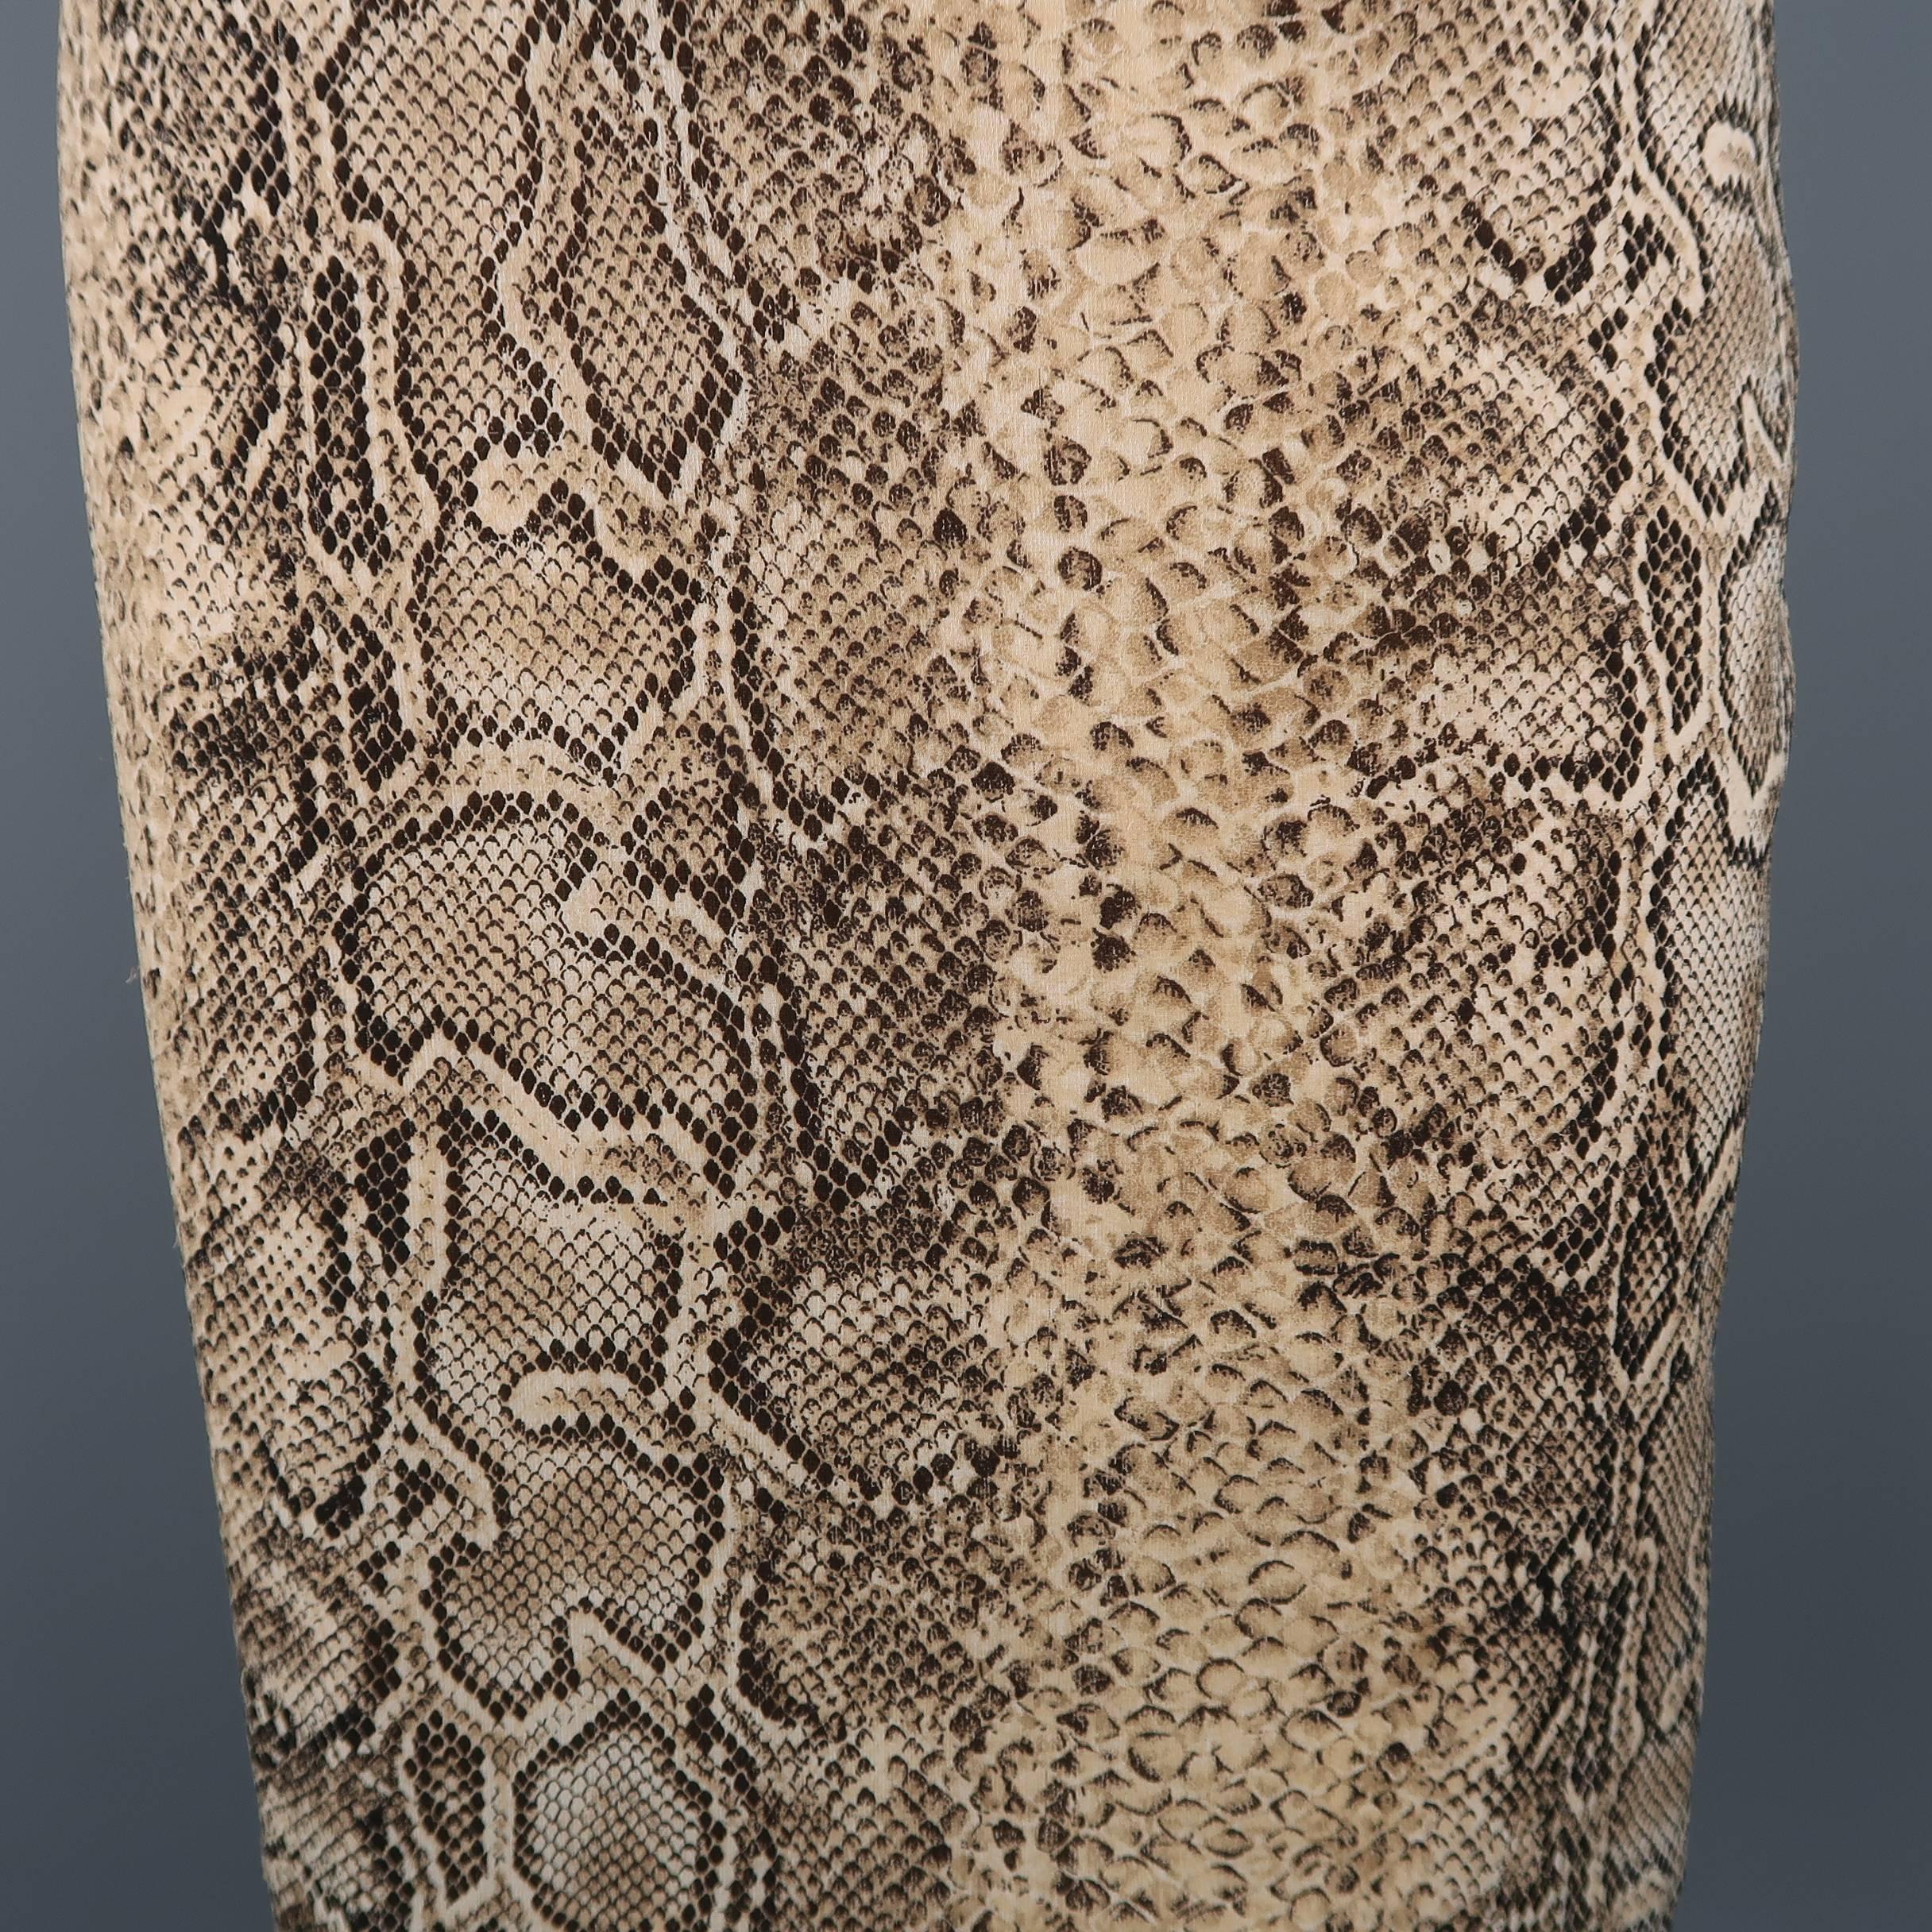 Archive DOLCE & GABBANA pencil skirt comes in python snake print silk chiffon with tan satin liner and hidden back zip closure. Hook eye closure missing from back. Tag cut.  As-is. Made in Italy.
 
Good Pre-Owned Condition.
Marked: (no tag)
